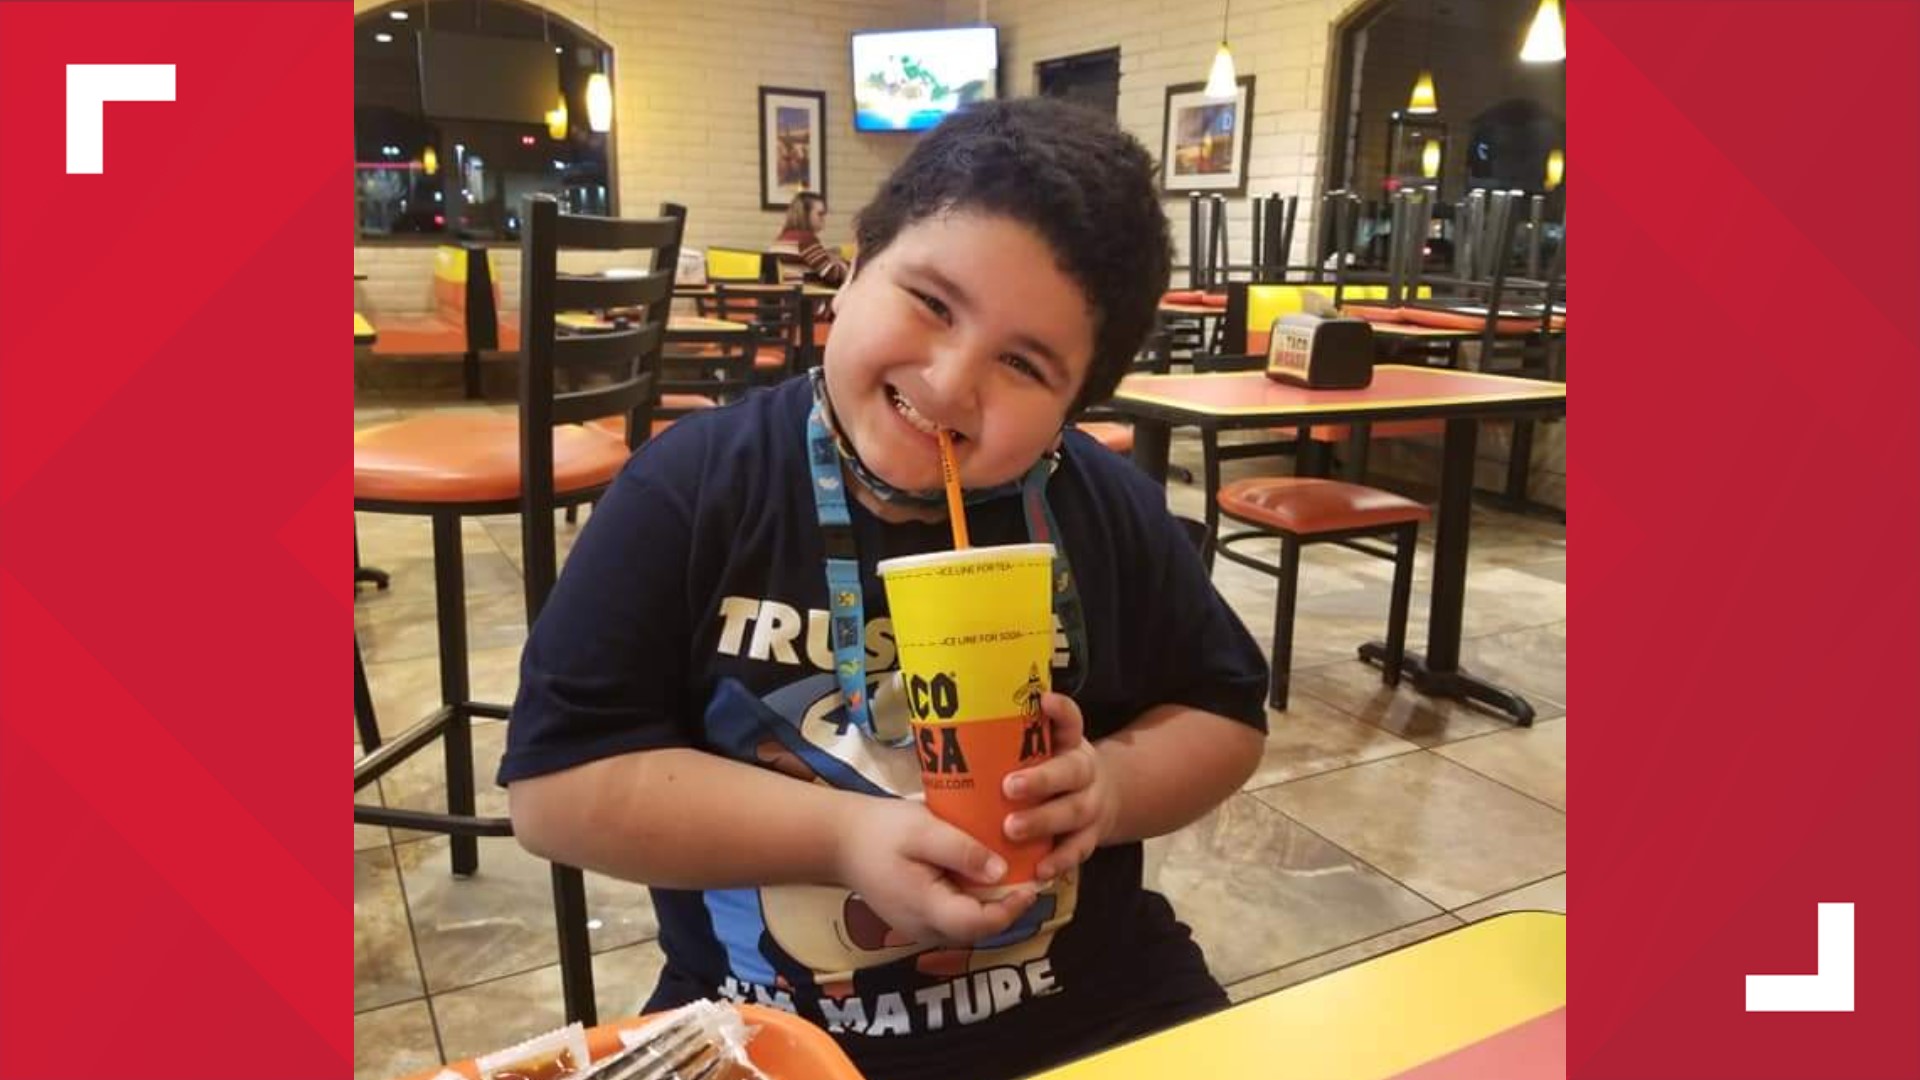 A 9-year-old Vernon boy who died early Tuesday morning at Cook Children's Hospital in Fort Worth died from COVID-19 complications, his family said Wednesday.